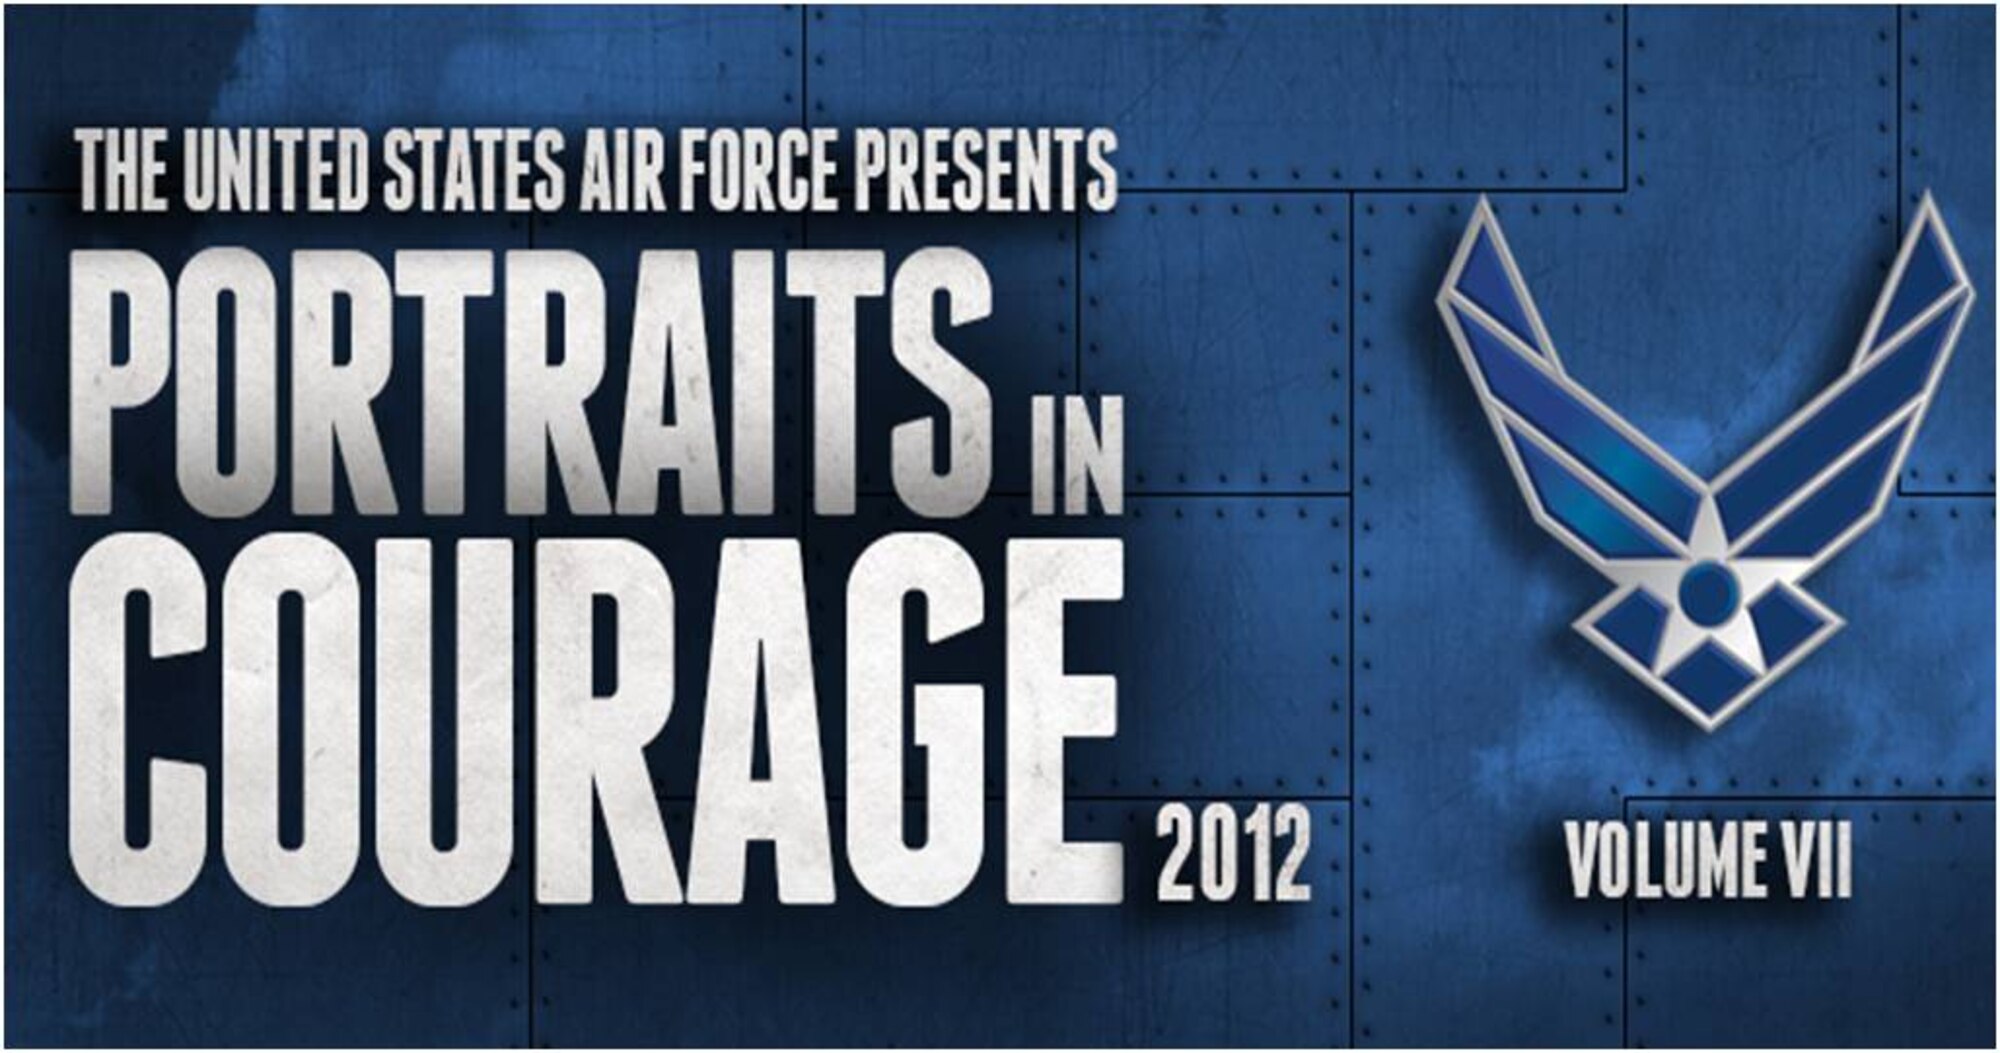 (Air Force graphic)